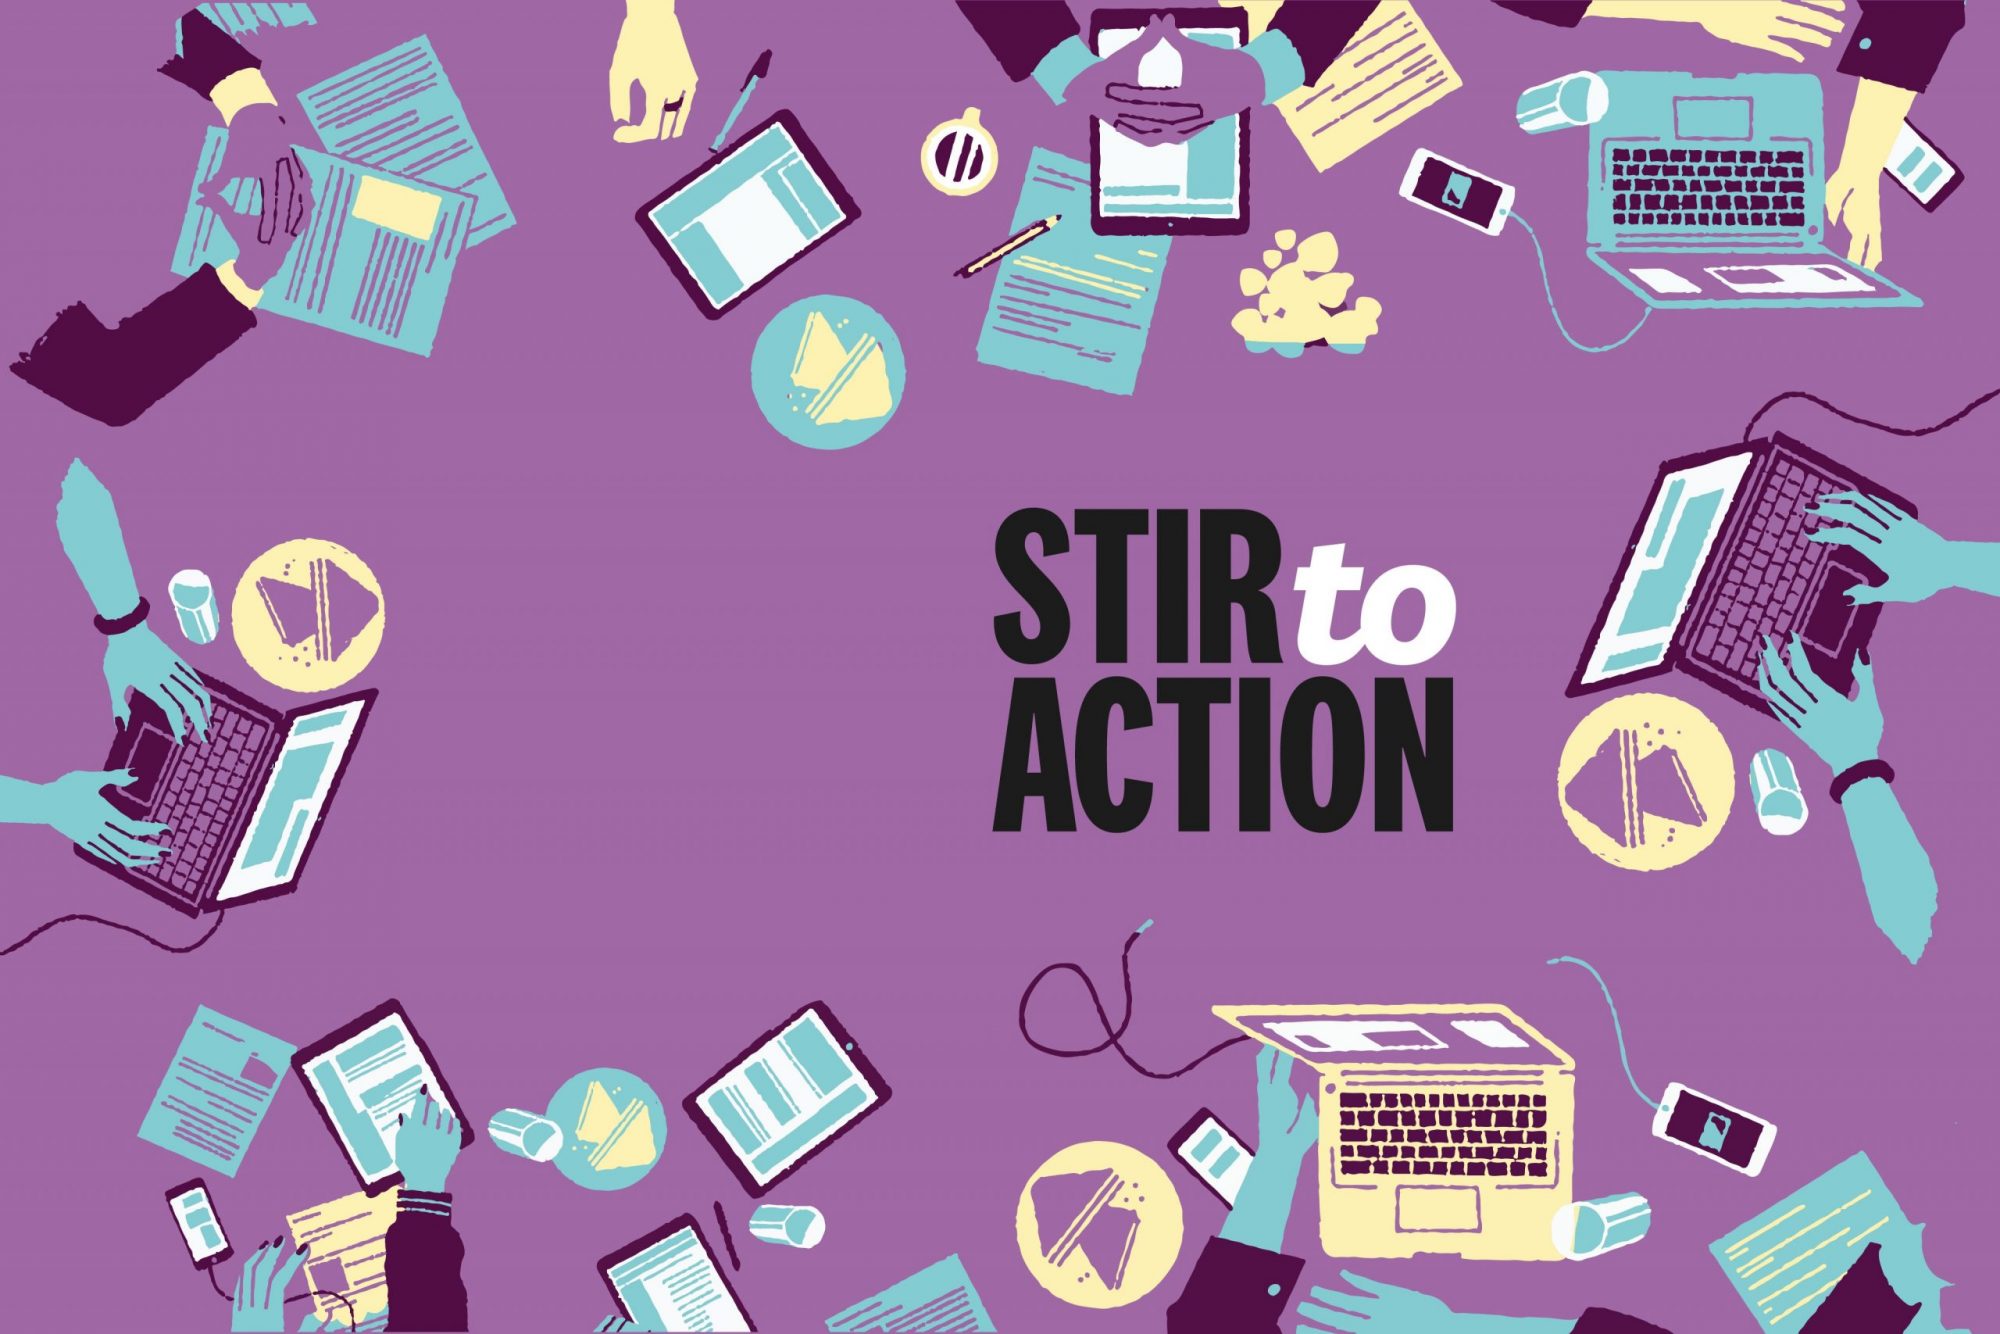 Stir to Action and Power to Change partner to relaunch 20 webinars for free to support communities